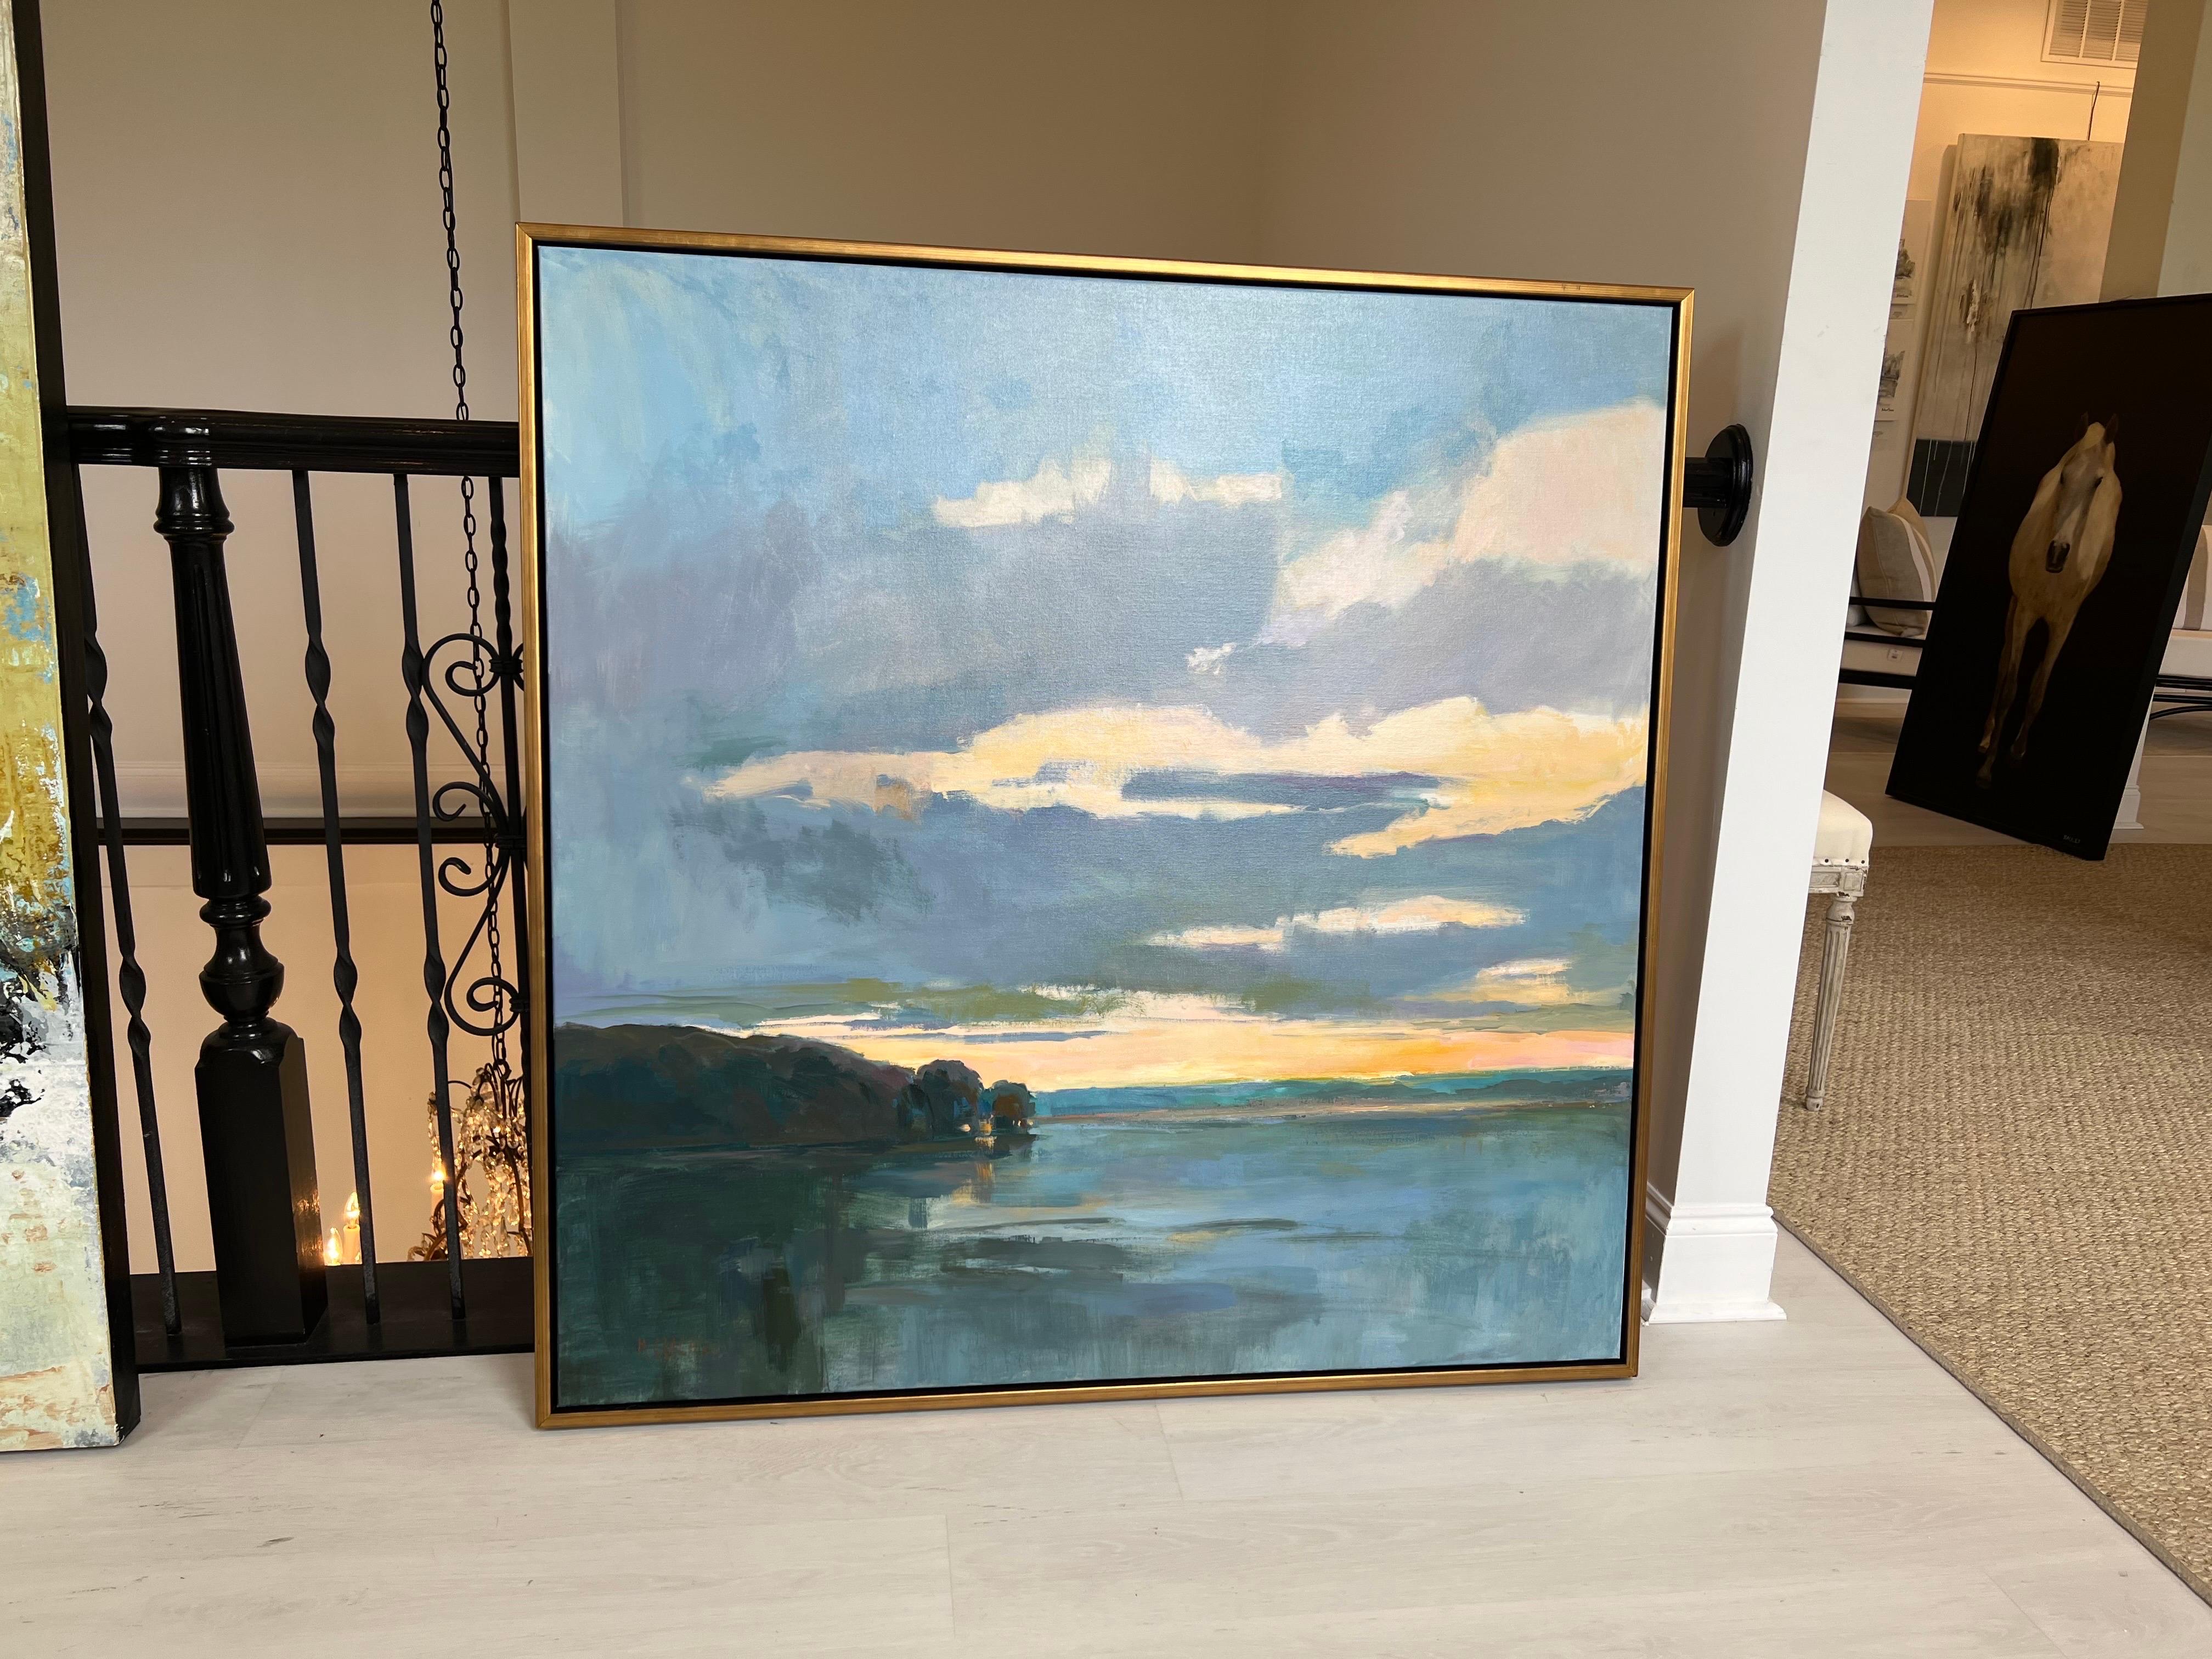 'Coastal Sunset' is a framed Impressionist plein air landscape painting created by American artist Millie Gosch in 2022. Featuring a rich palette mostly made of blue, green, pink and orange tones, this oil on canvas painting.  Framed inside an